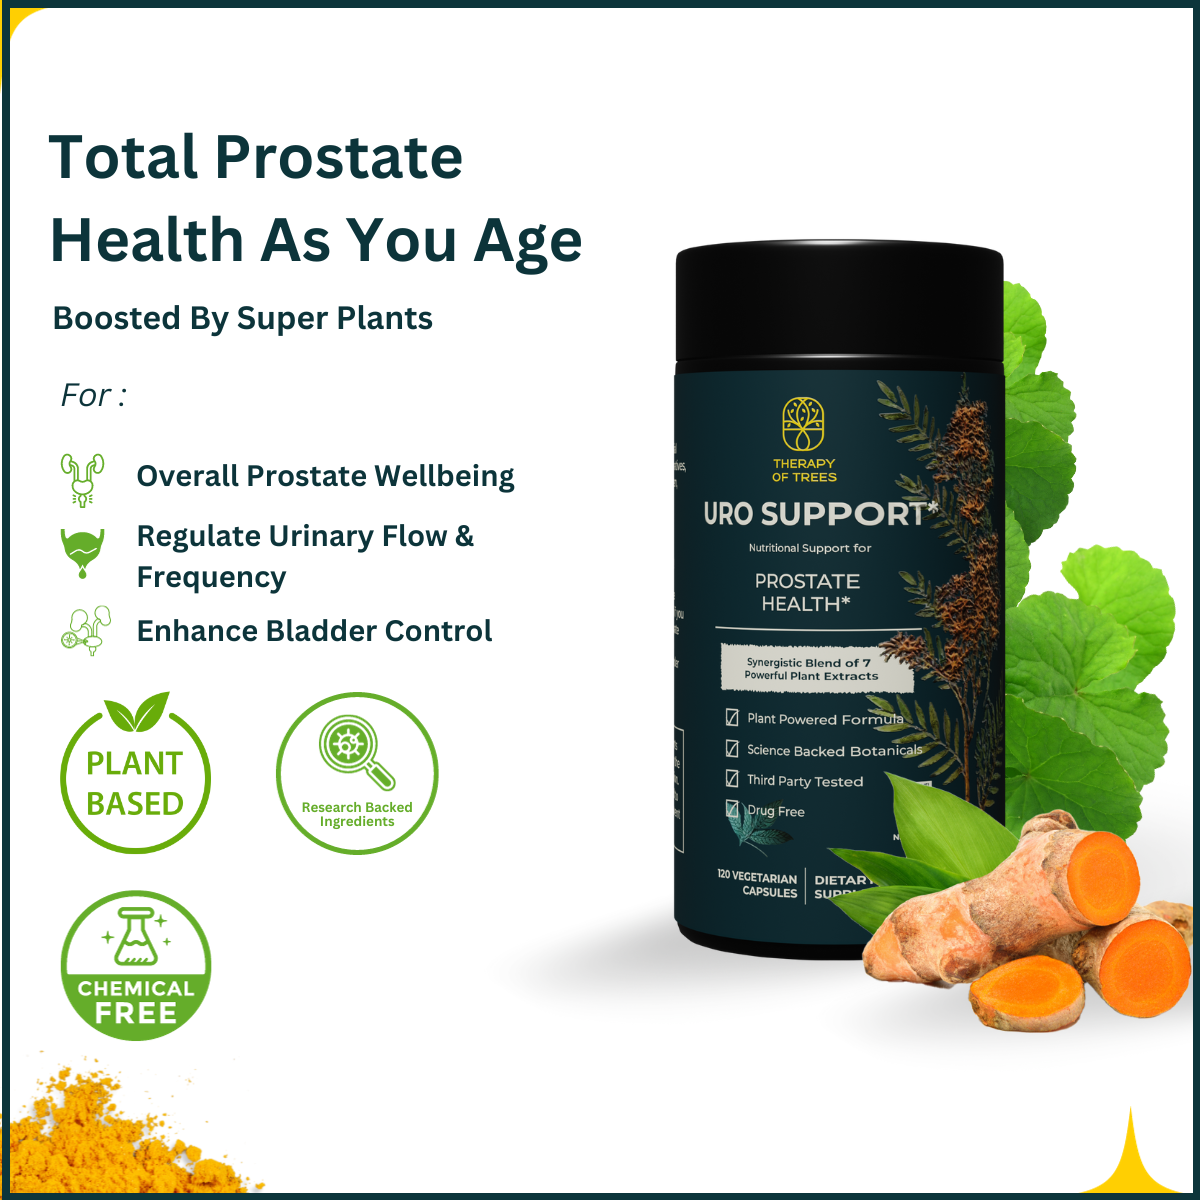 Uro Support: Advanced Support for Prostate Health and Urinary Wellness for Men